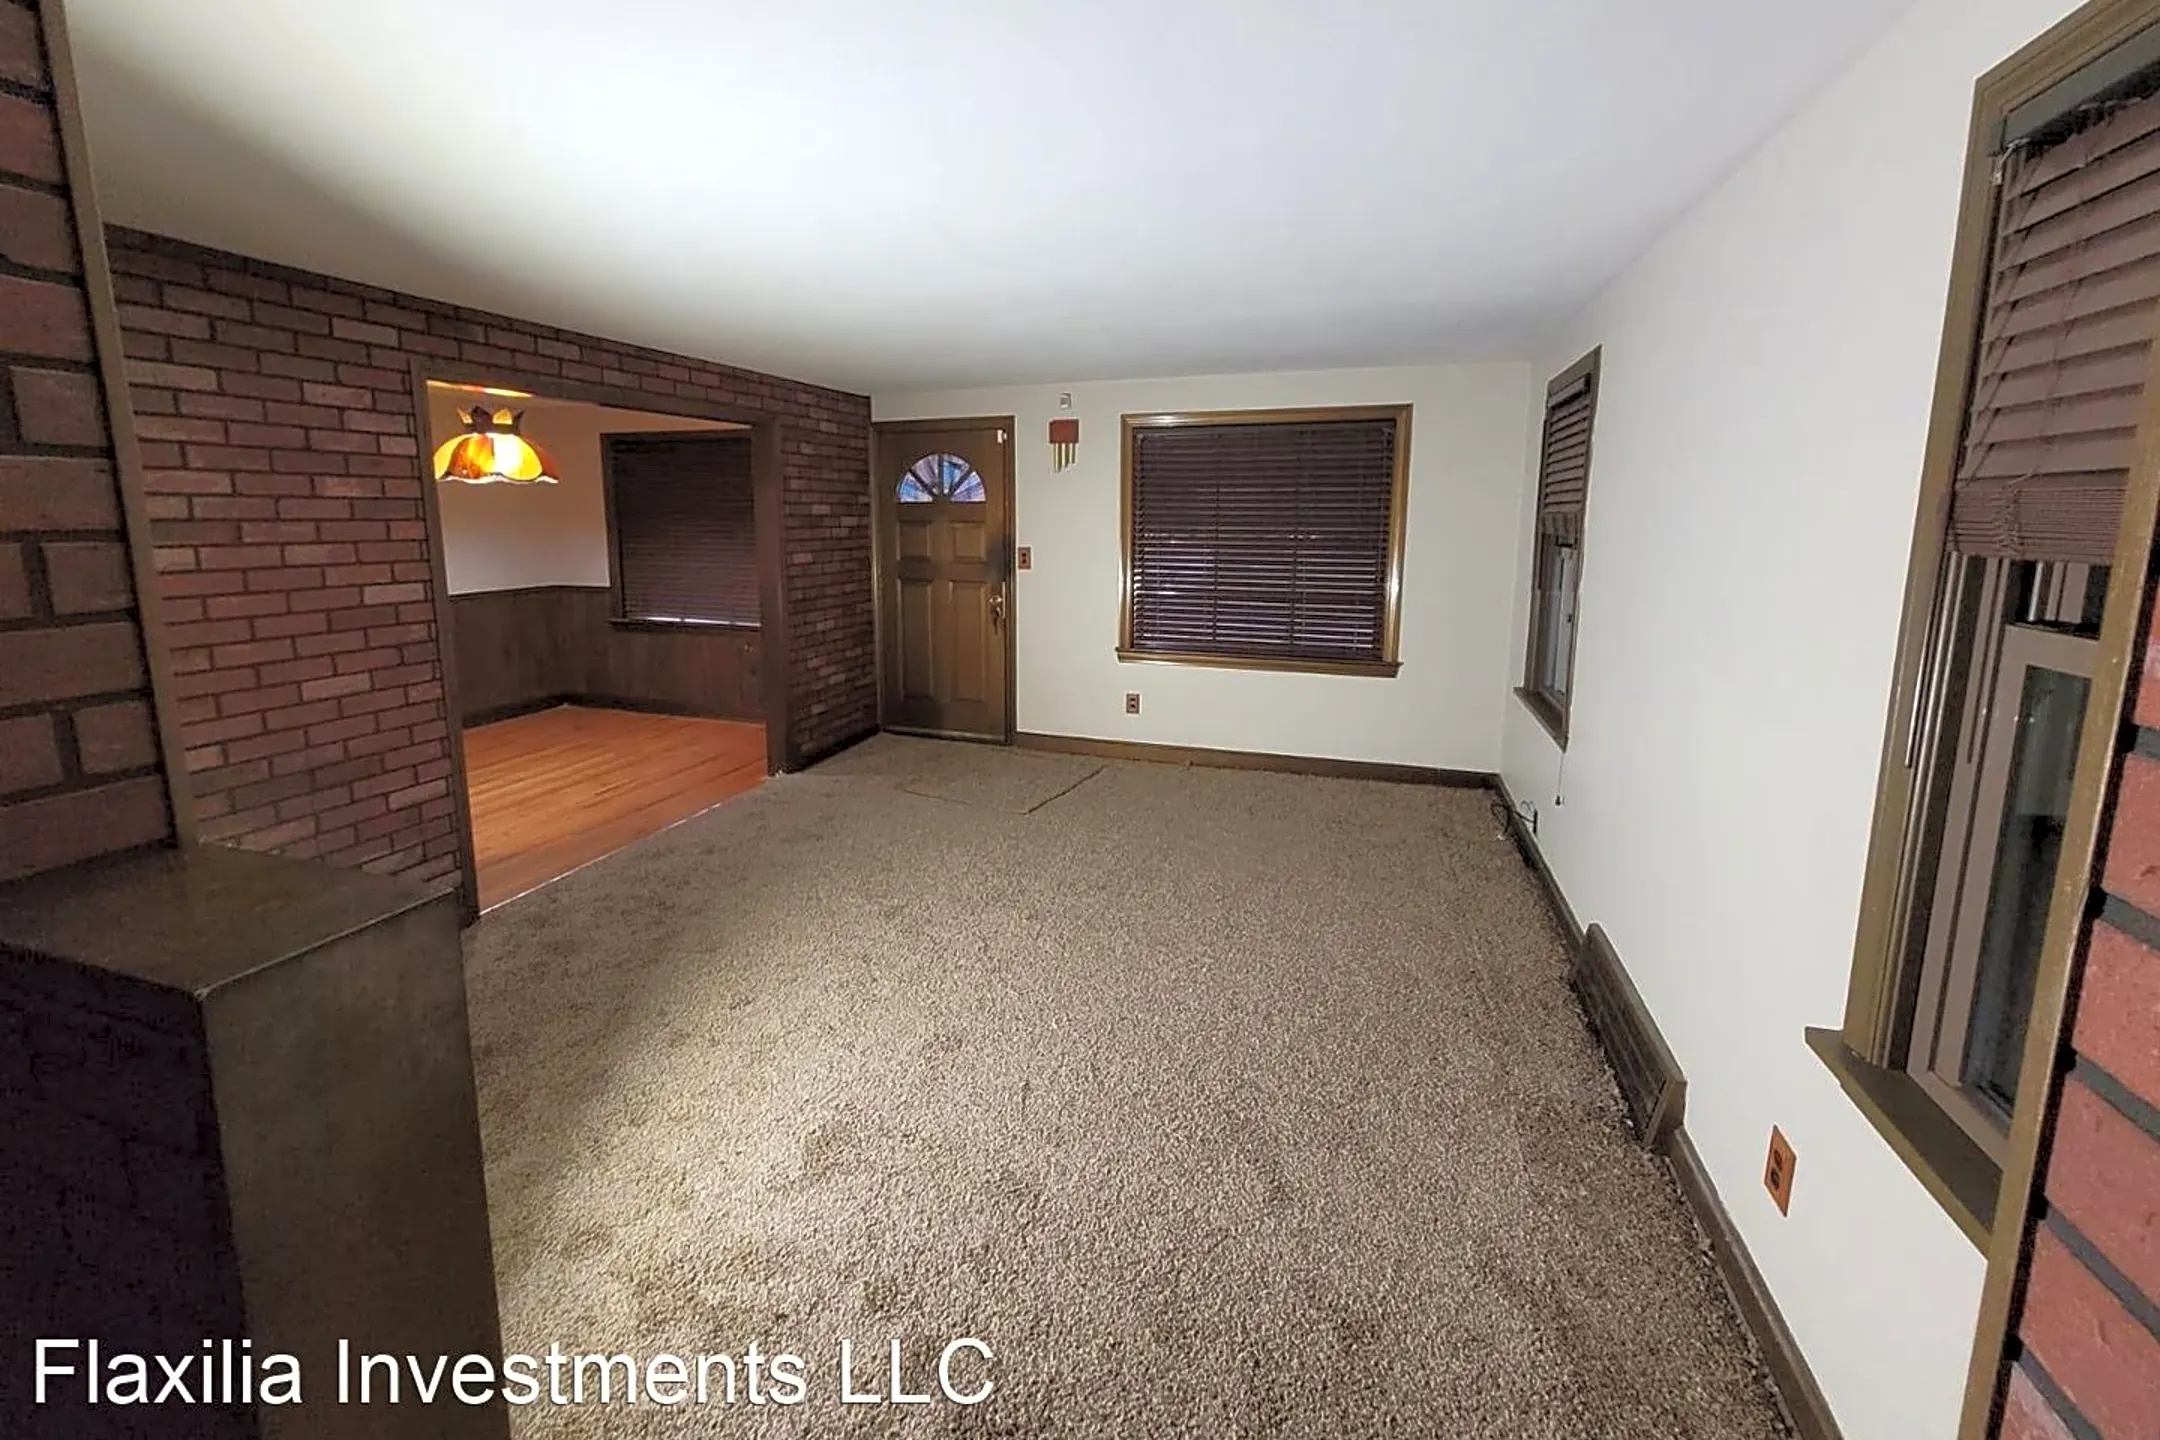 Living Room - 5419 Beechwood Ave - Maple Heights, OH